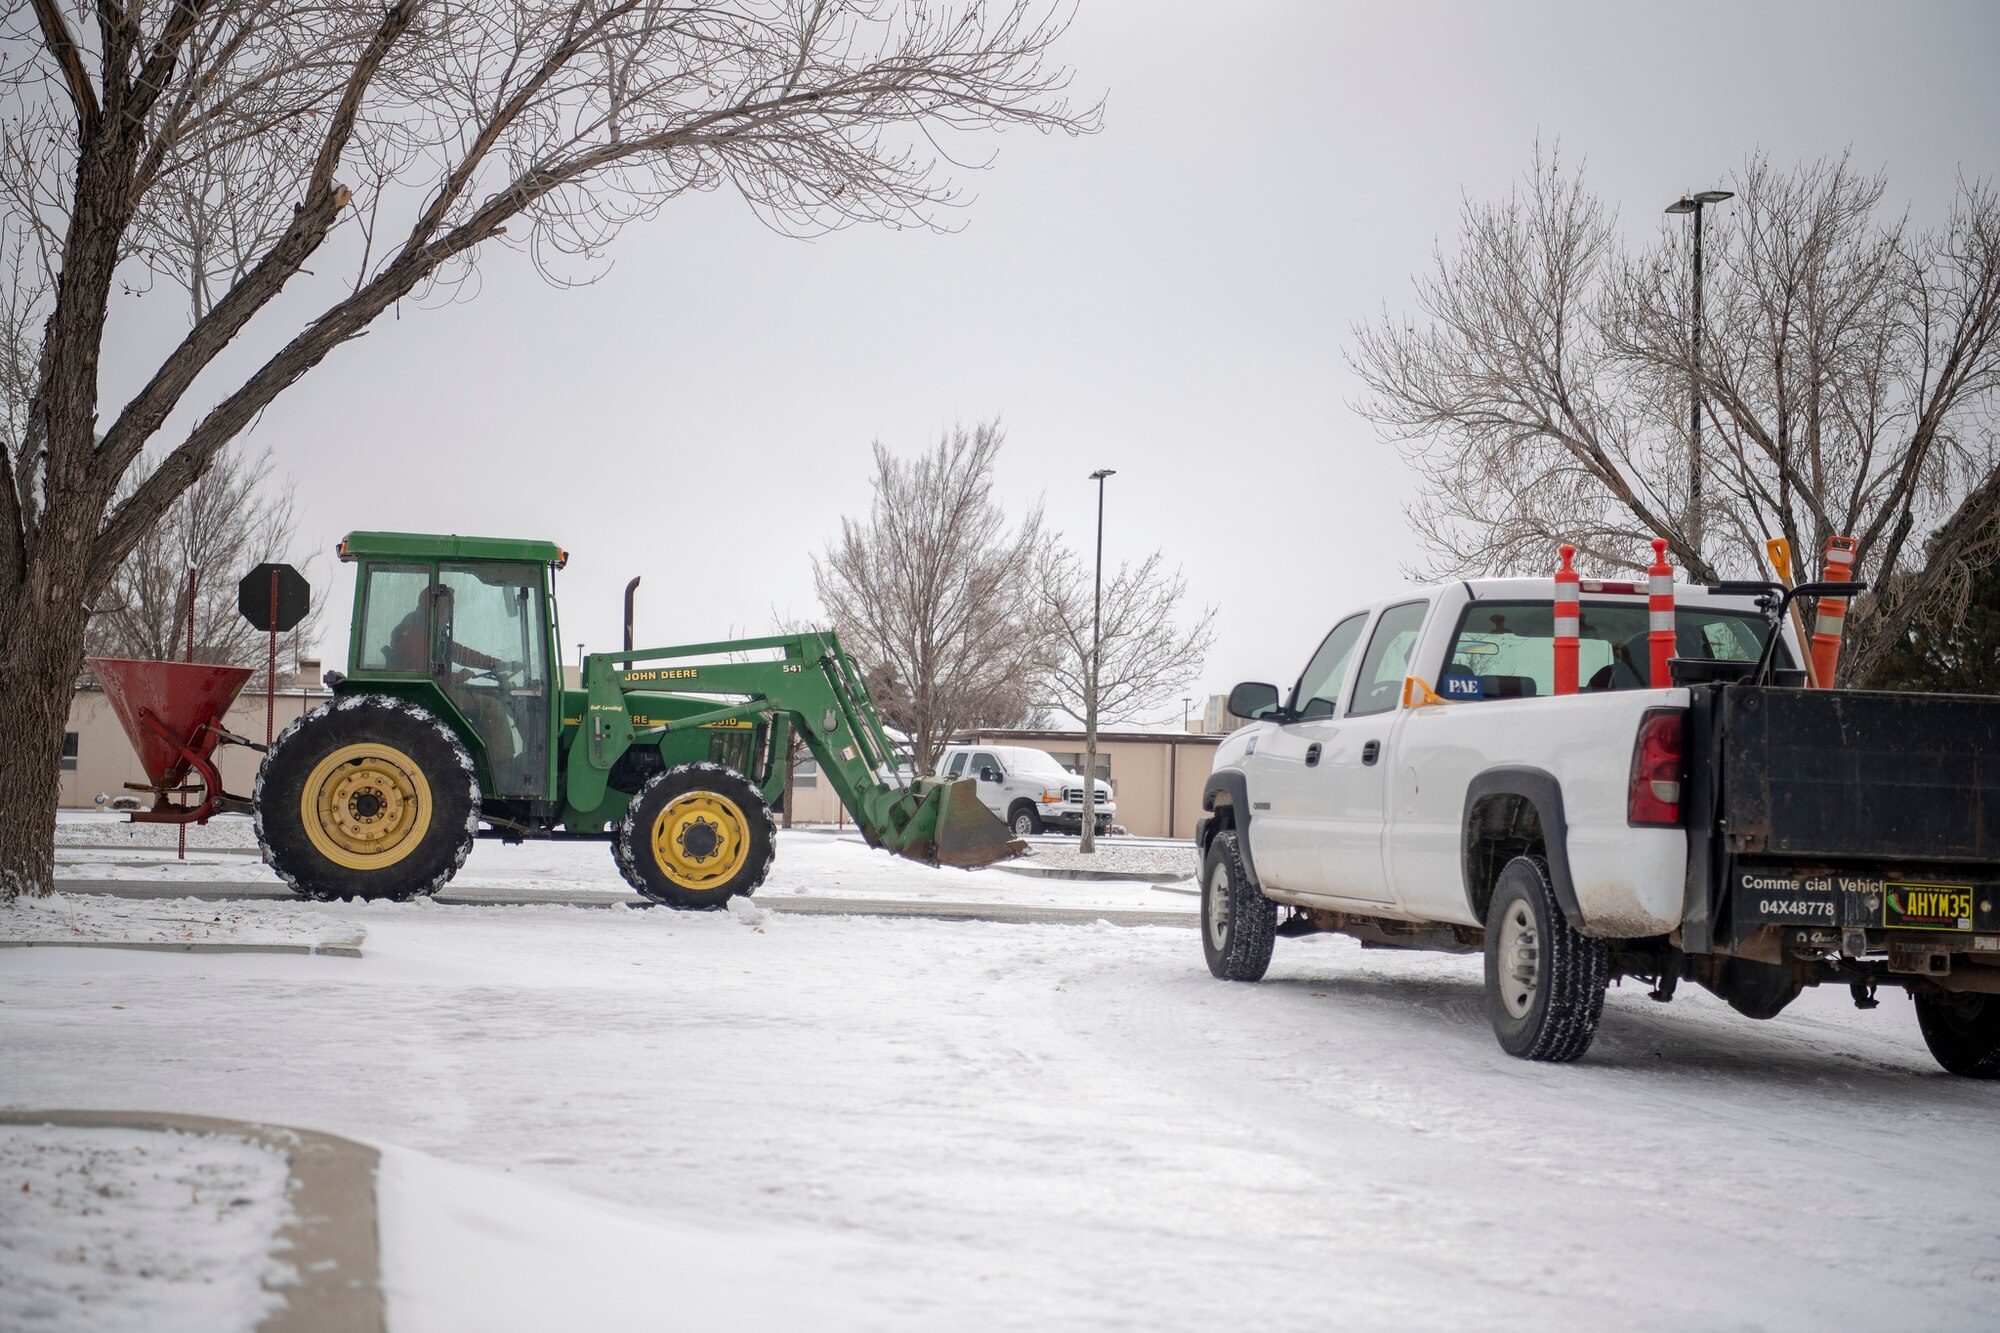 Kirtland personnel clear roads on Dec. 27, 2018. A blizzard blanketed the Albuquerque area and prompted closure of Kirtland Air Force Base to non-mission essential personnel on Dec. 27, and 28, 2018.